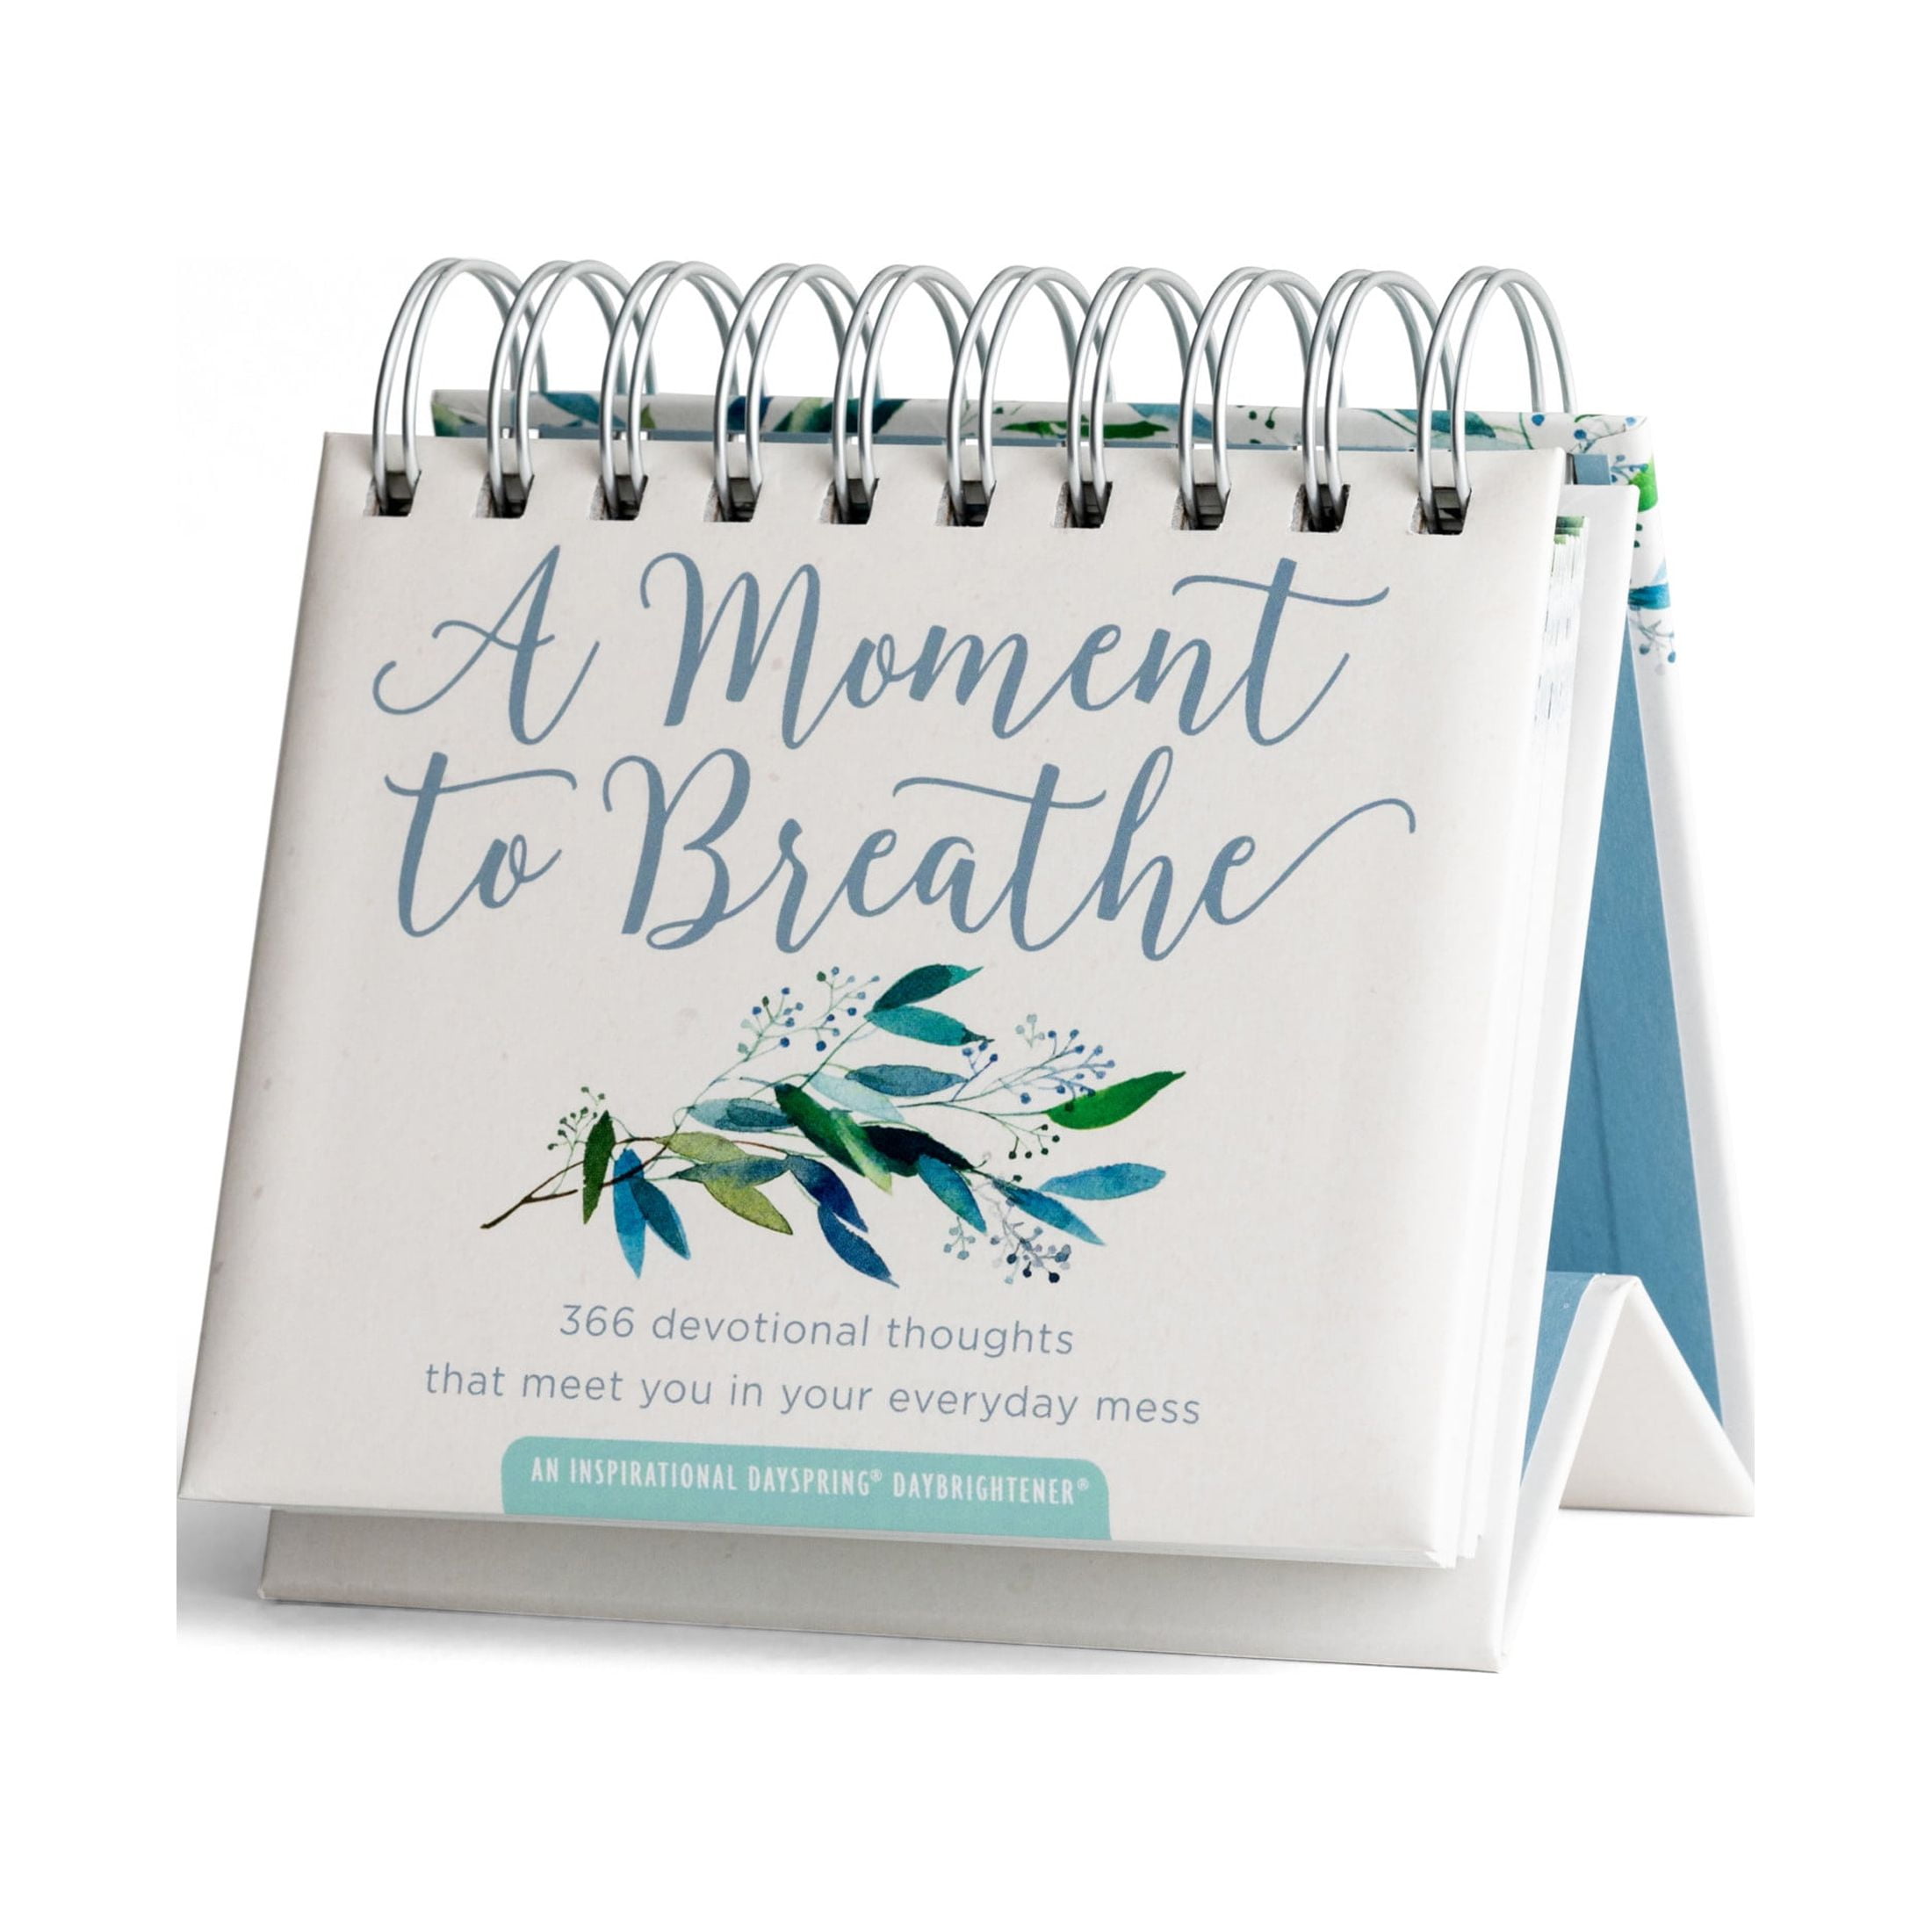 Picture of Dayspring Cards 137492 A Moment to Breathe Day Brightener Calendar